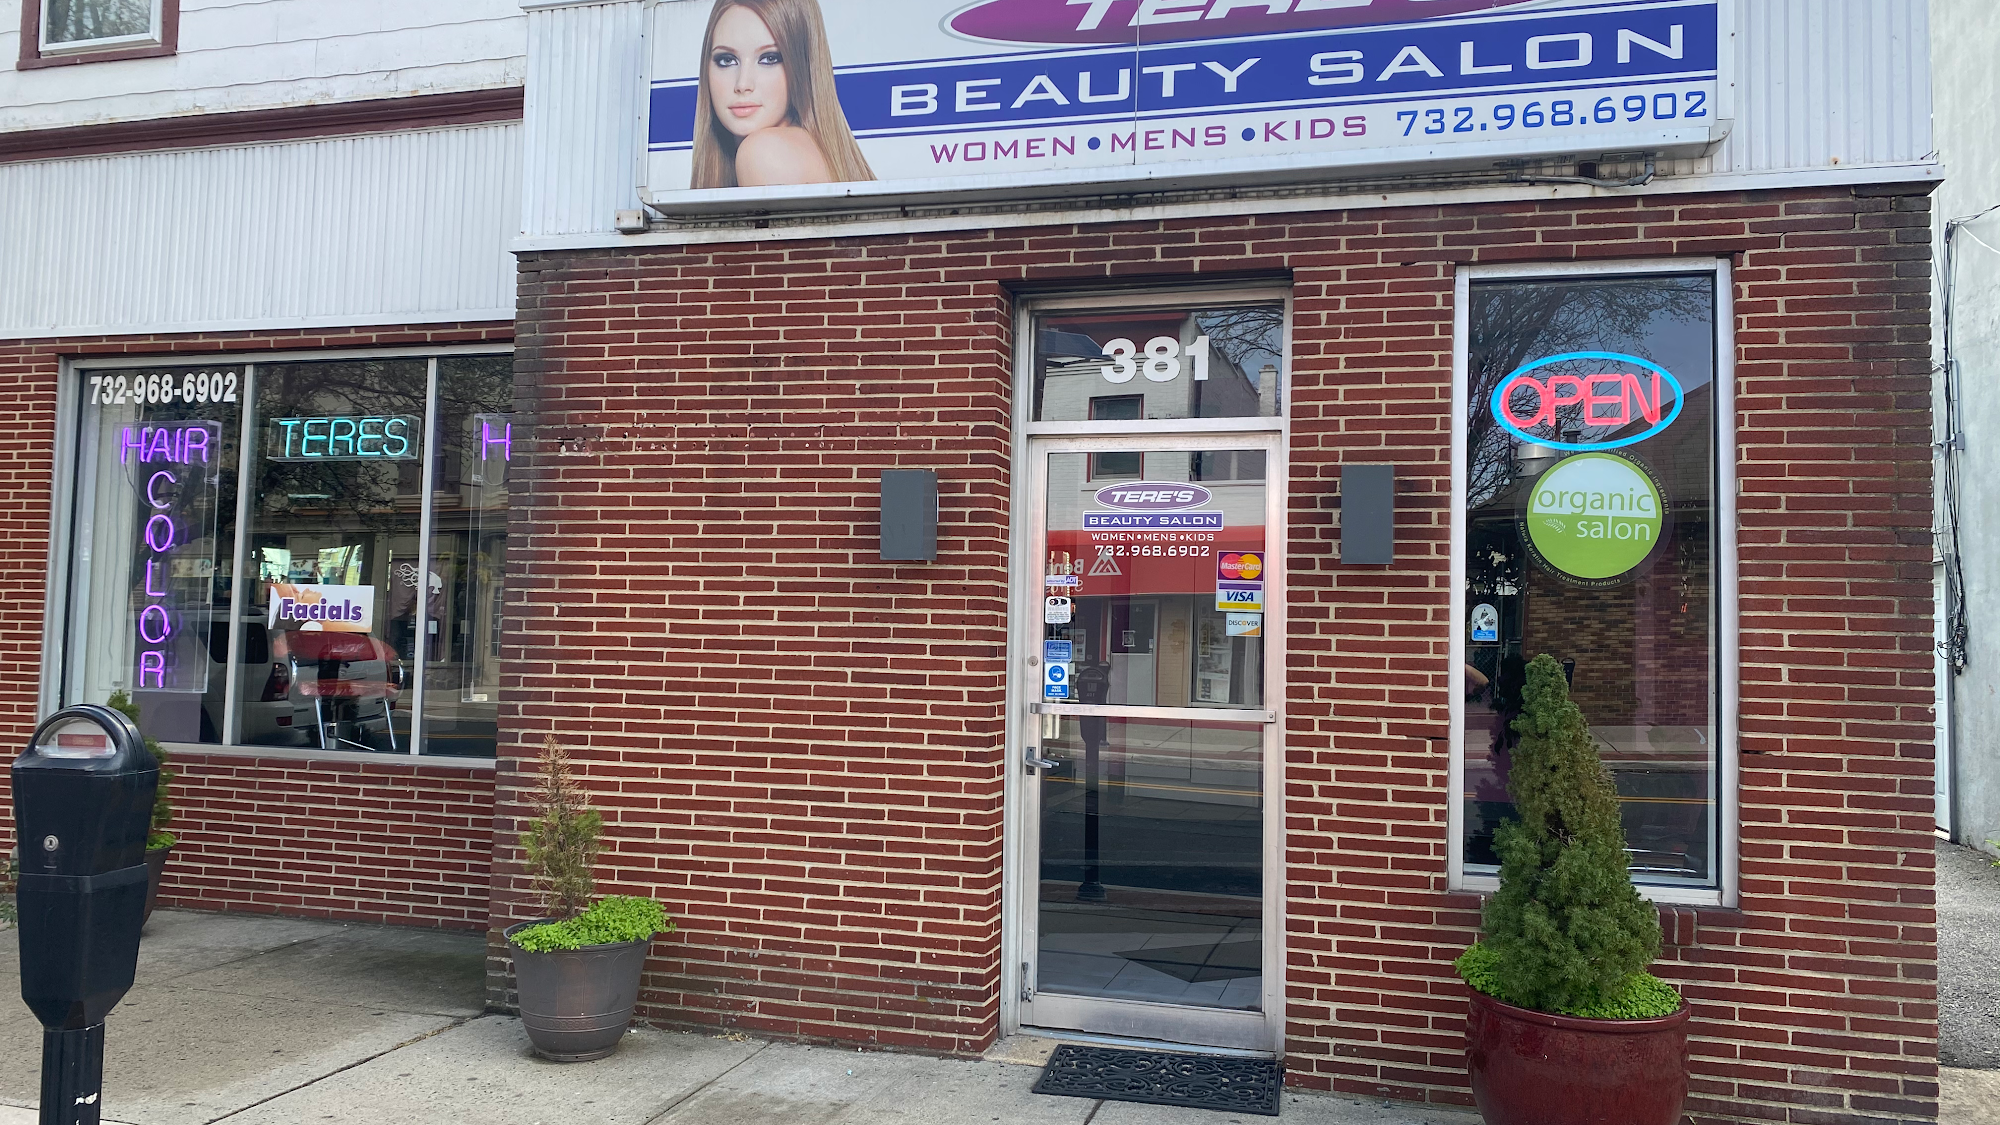 Tere's Beauty Salon and permanent make up clinic.